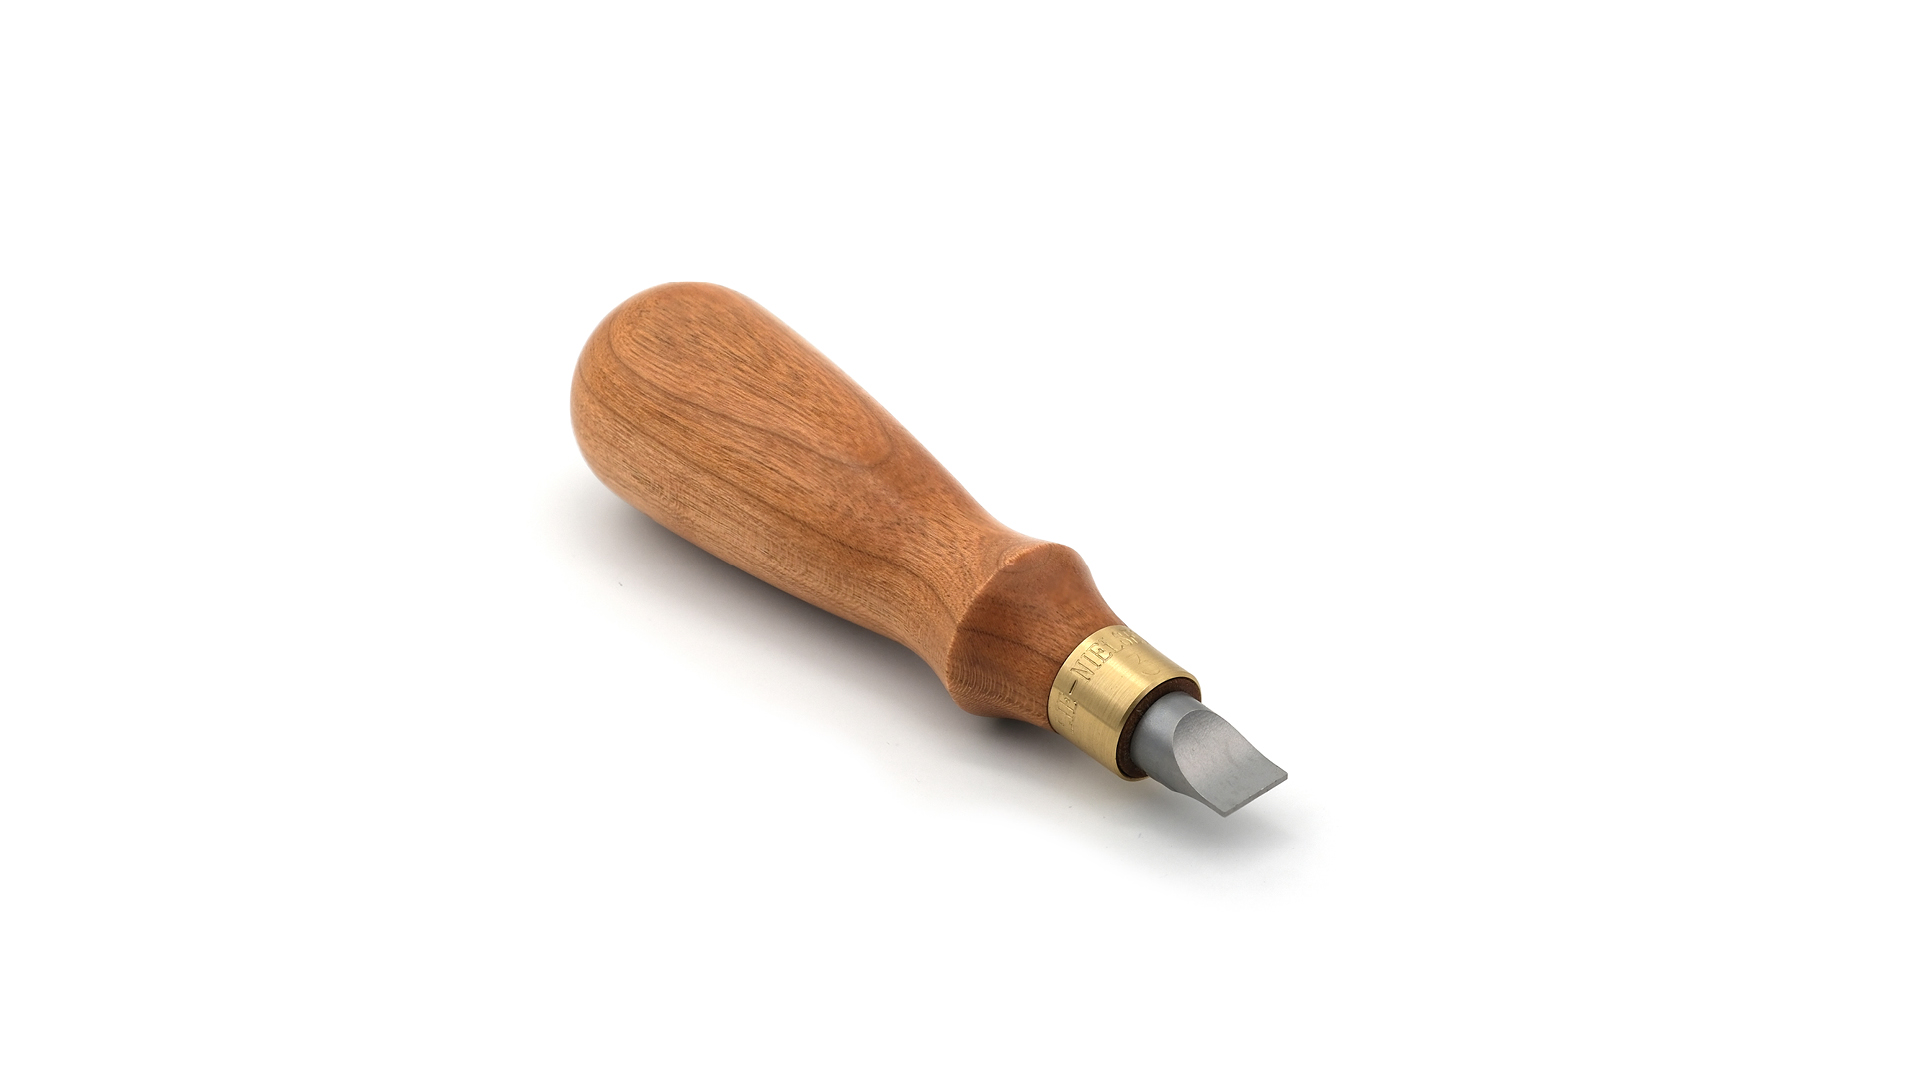 Tenon Saw Nut Screwdriver with Cherry Handle